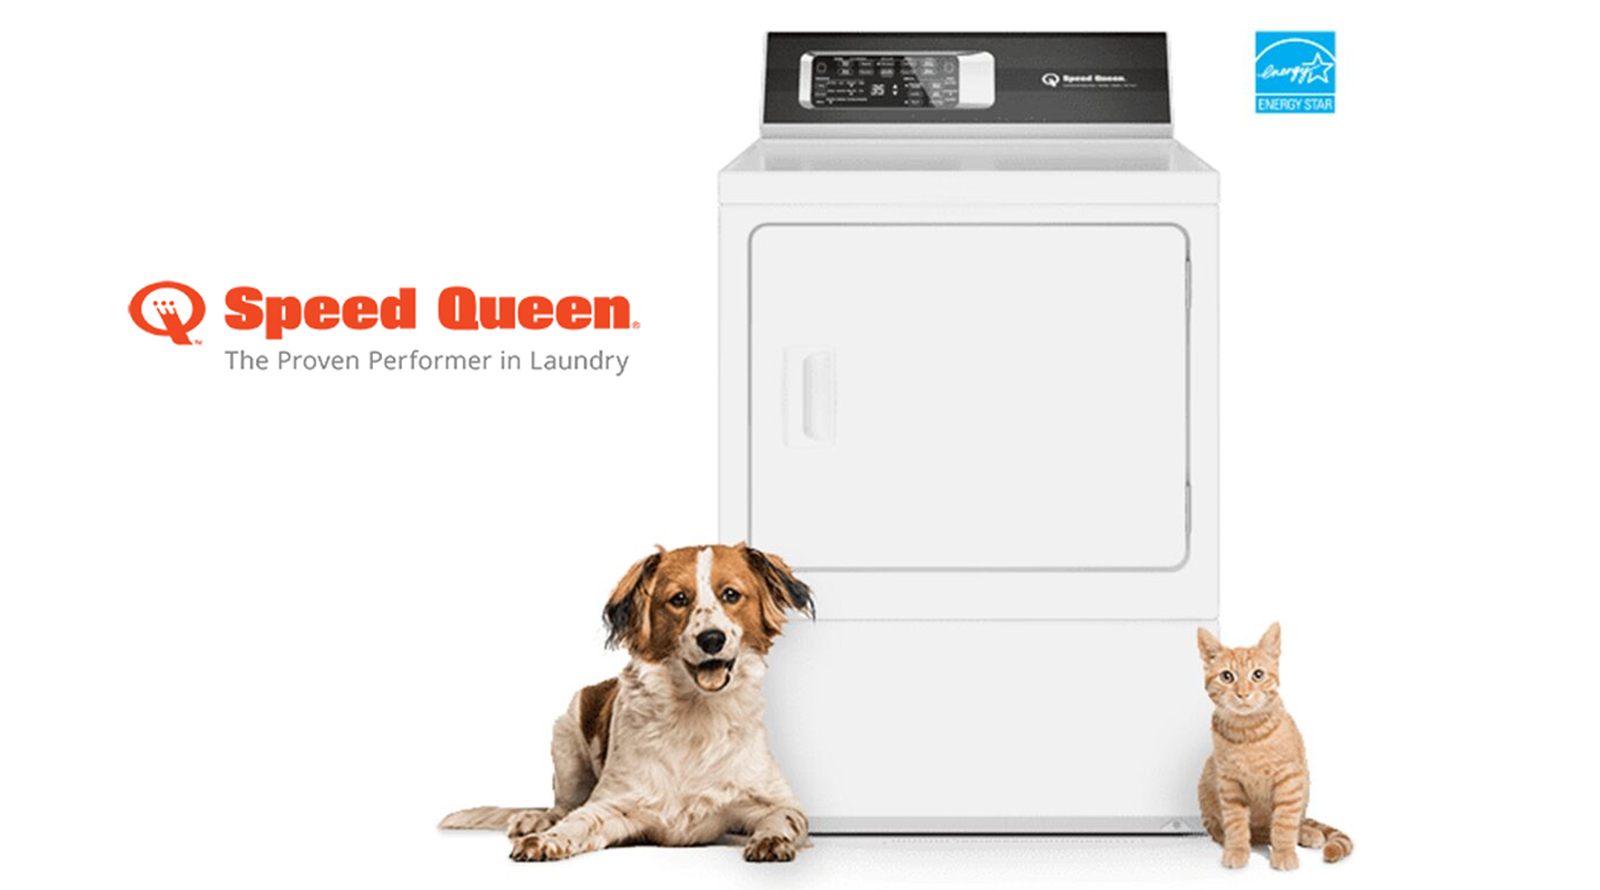 SPEED QUEEN: CULT BRAND OF WASHING MACHINE IN THE UNITED STATES